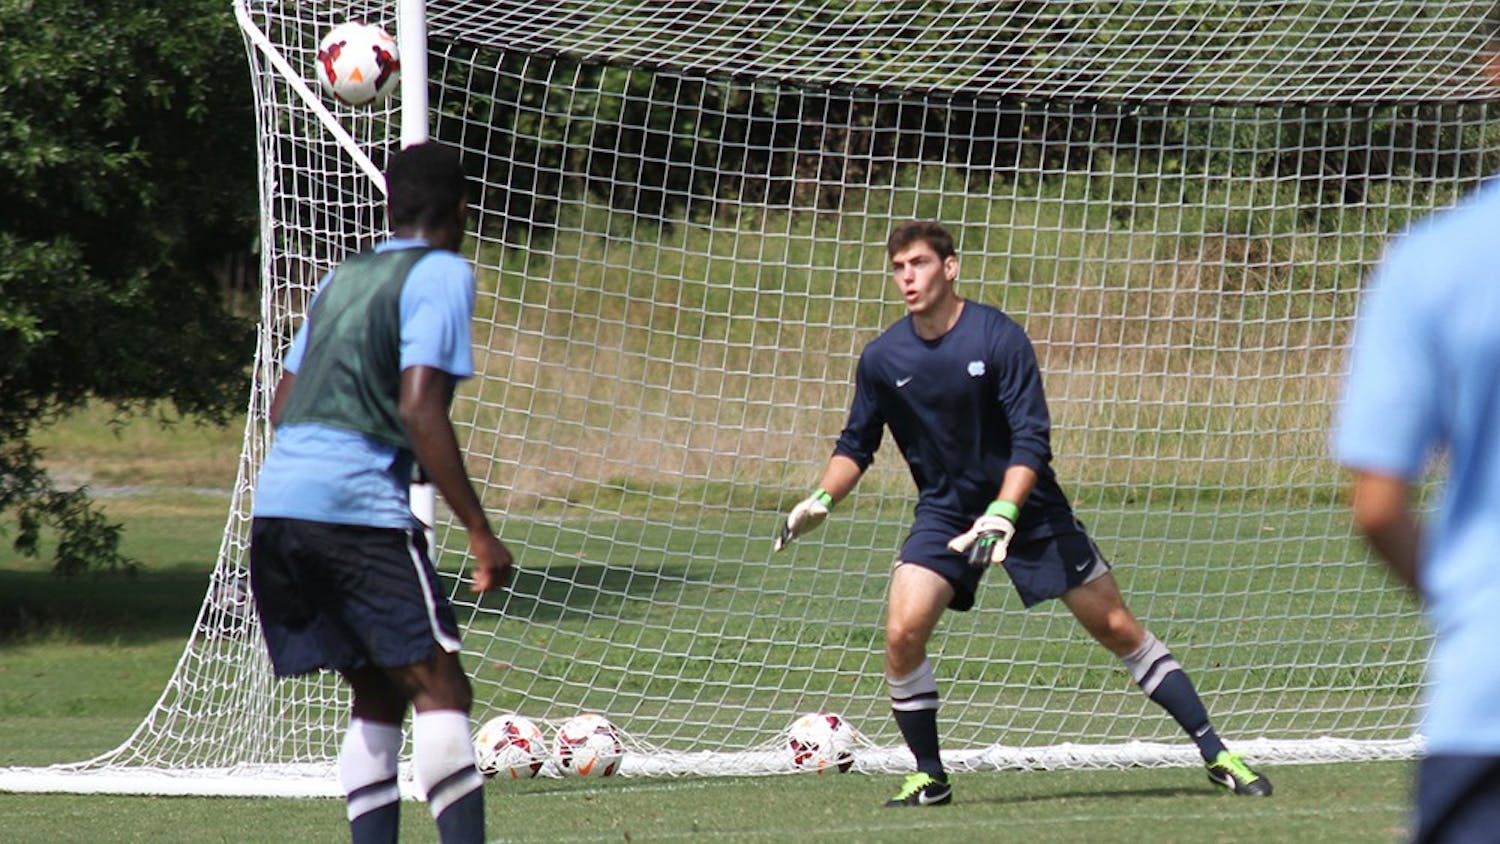 Men's soccer team practices at the Finley practice fields on Thursday, August 15. 